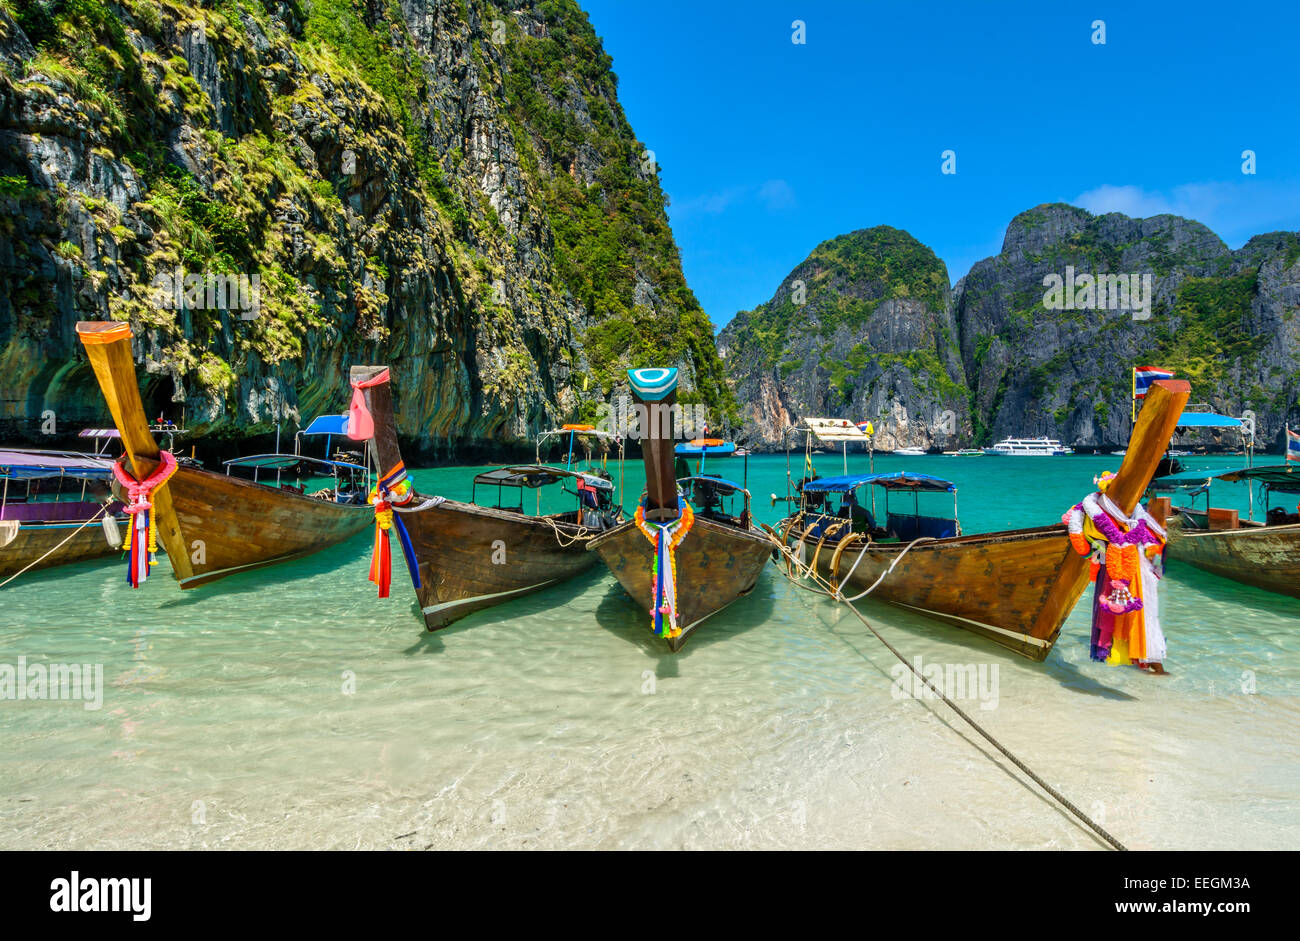 Maya Bay is a stunningly beautiful bay that's sheltered by 100-metre high cliffs on three sides with several beaches with soft w Stock Photo